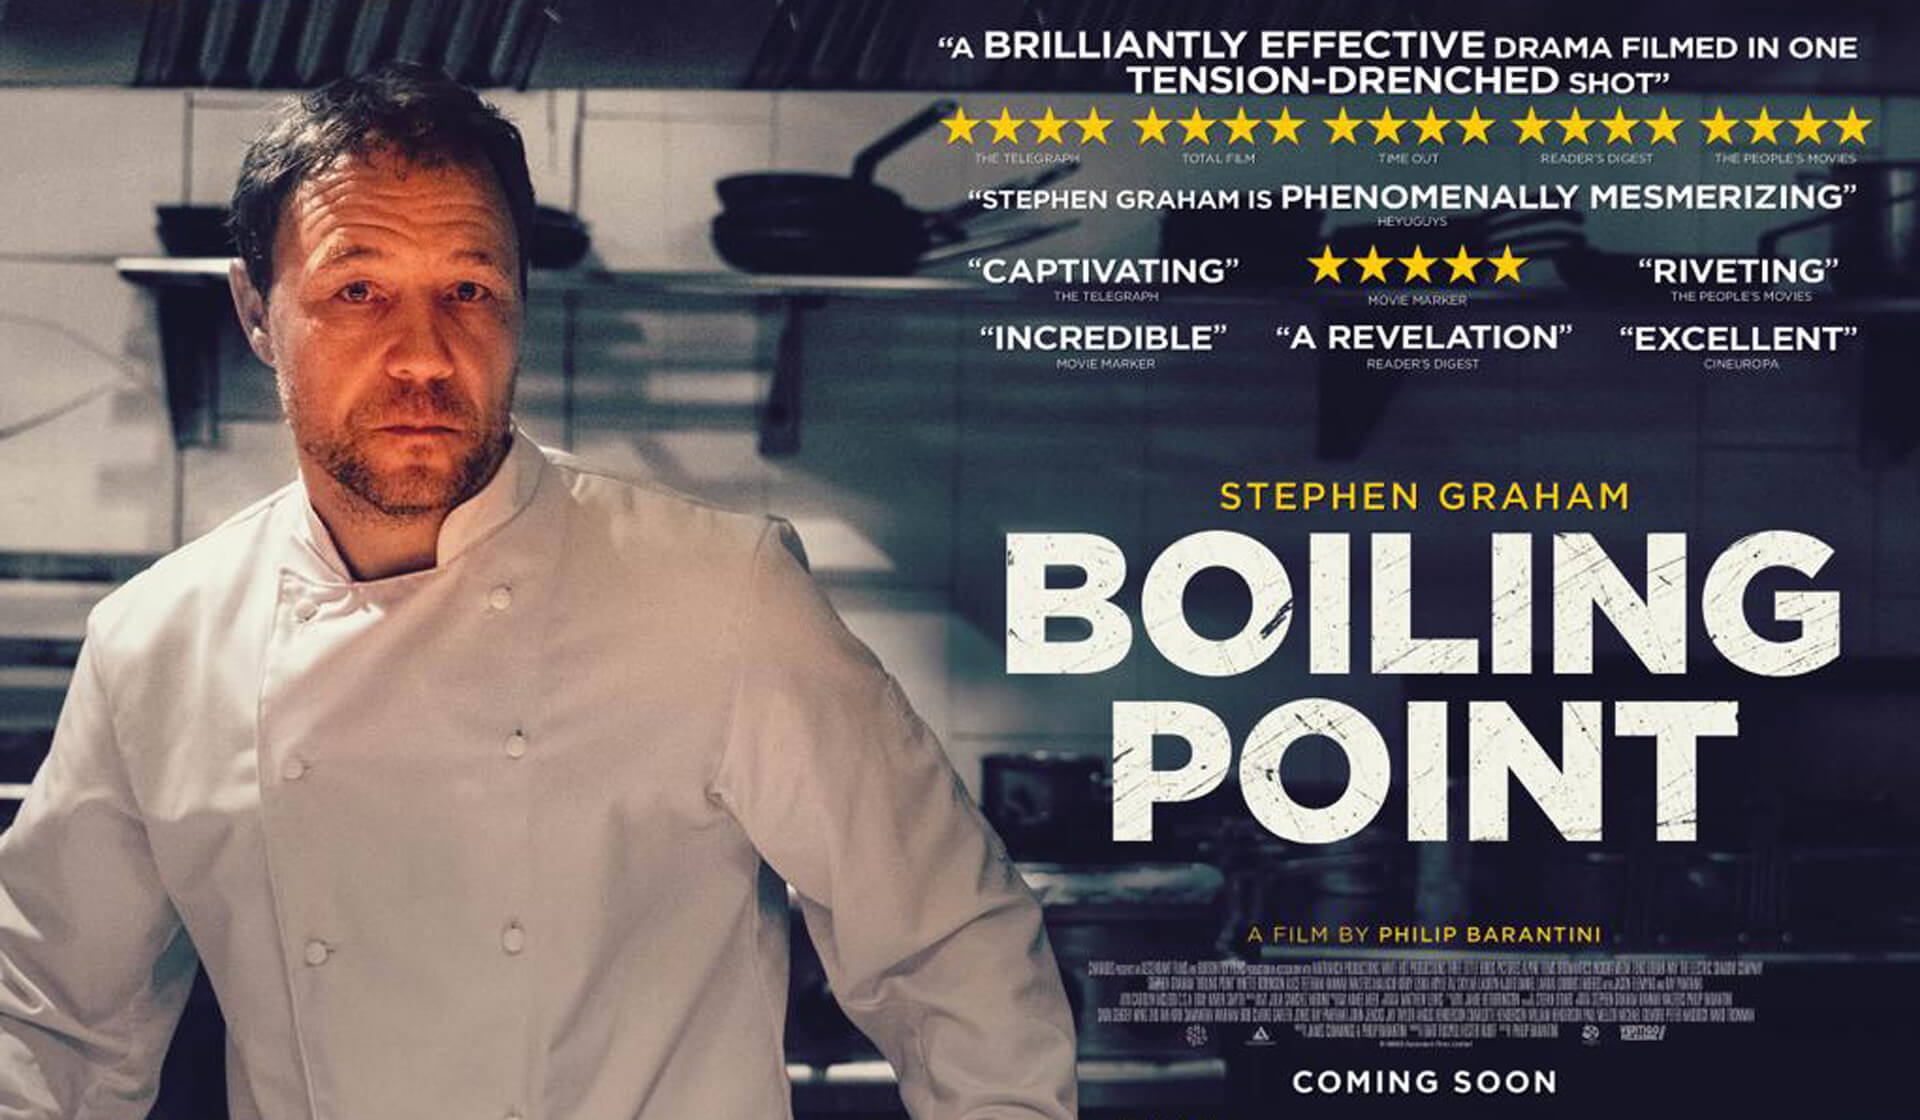 Boiling Point Film - Stephen Graham - Paul Mellor Exec Producer - Mellor&Smith - Official Movie Poster